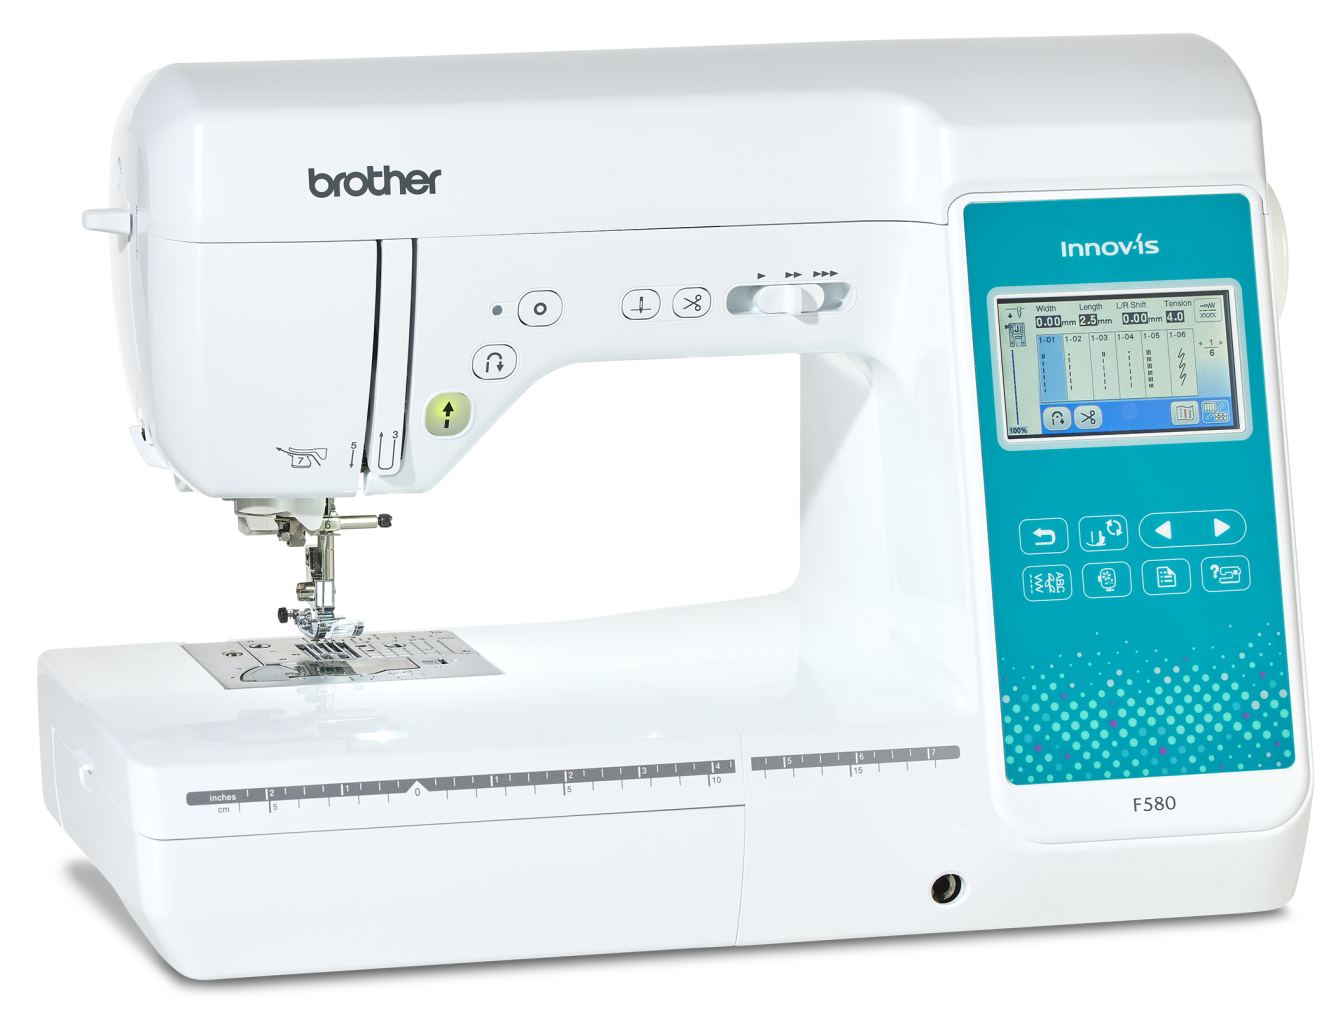 BROTHER Innov-is F580